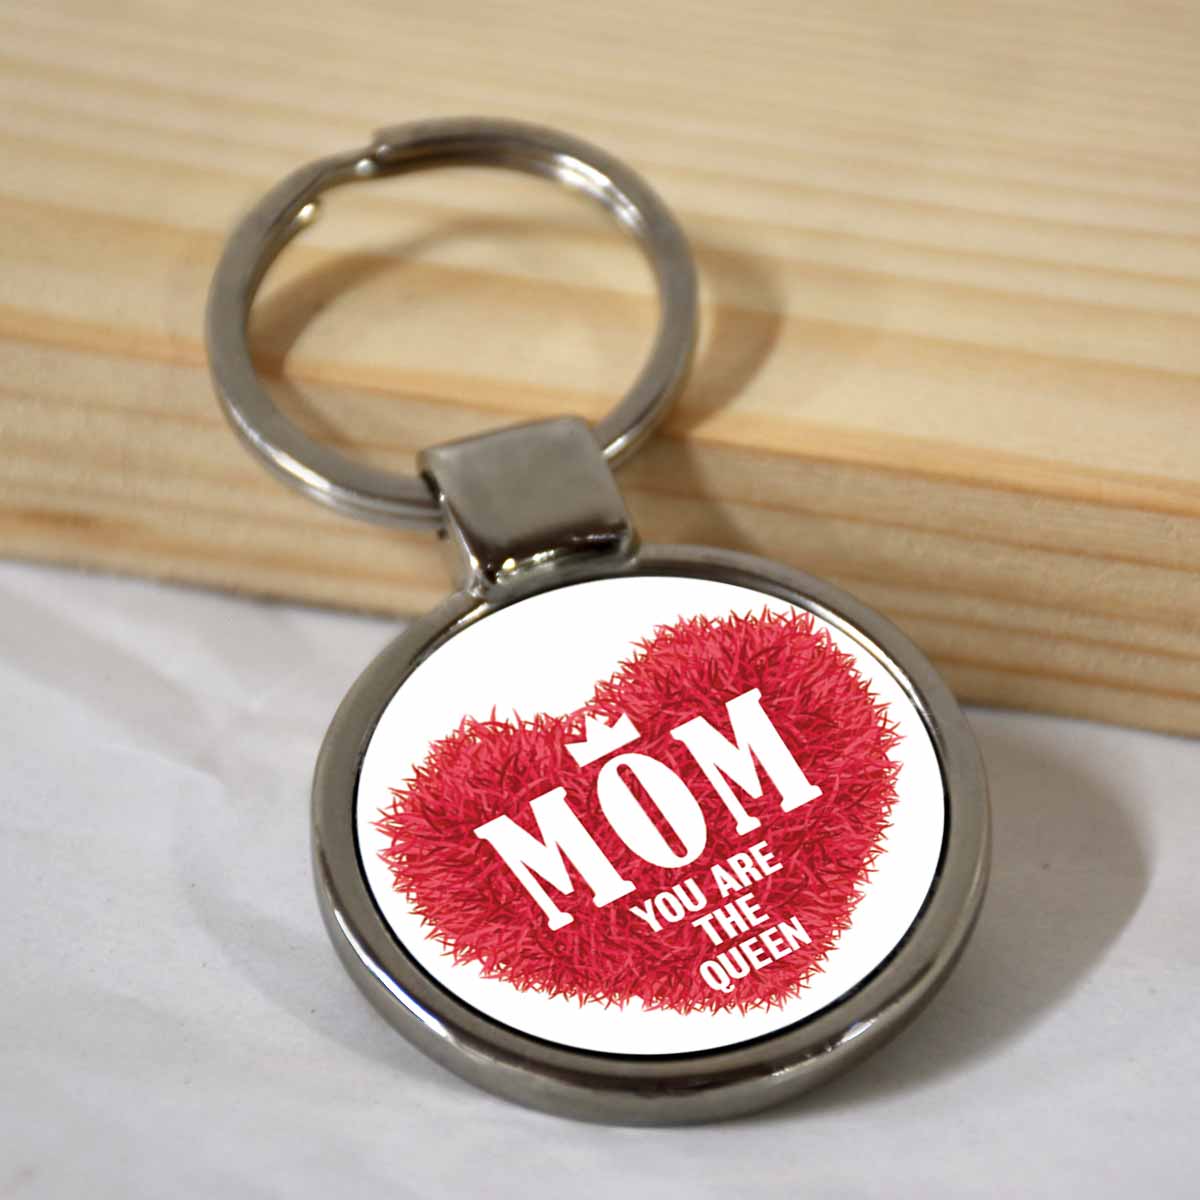 Mom You are the Queen Round Metal Keychain